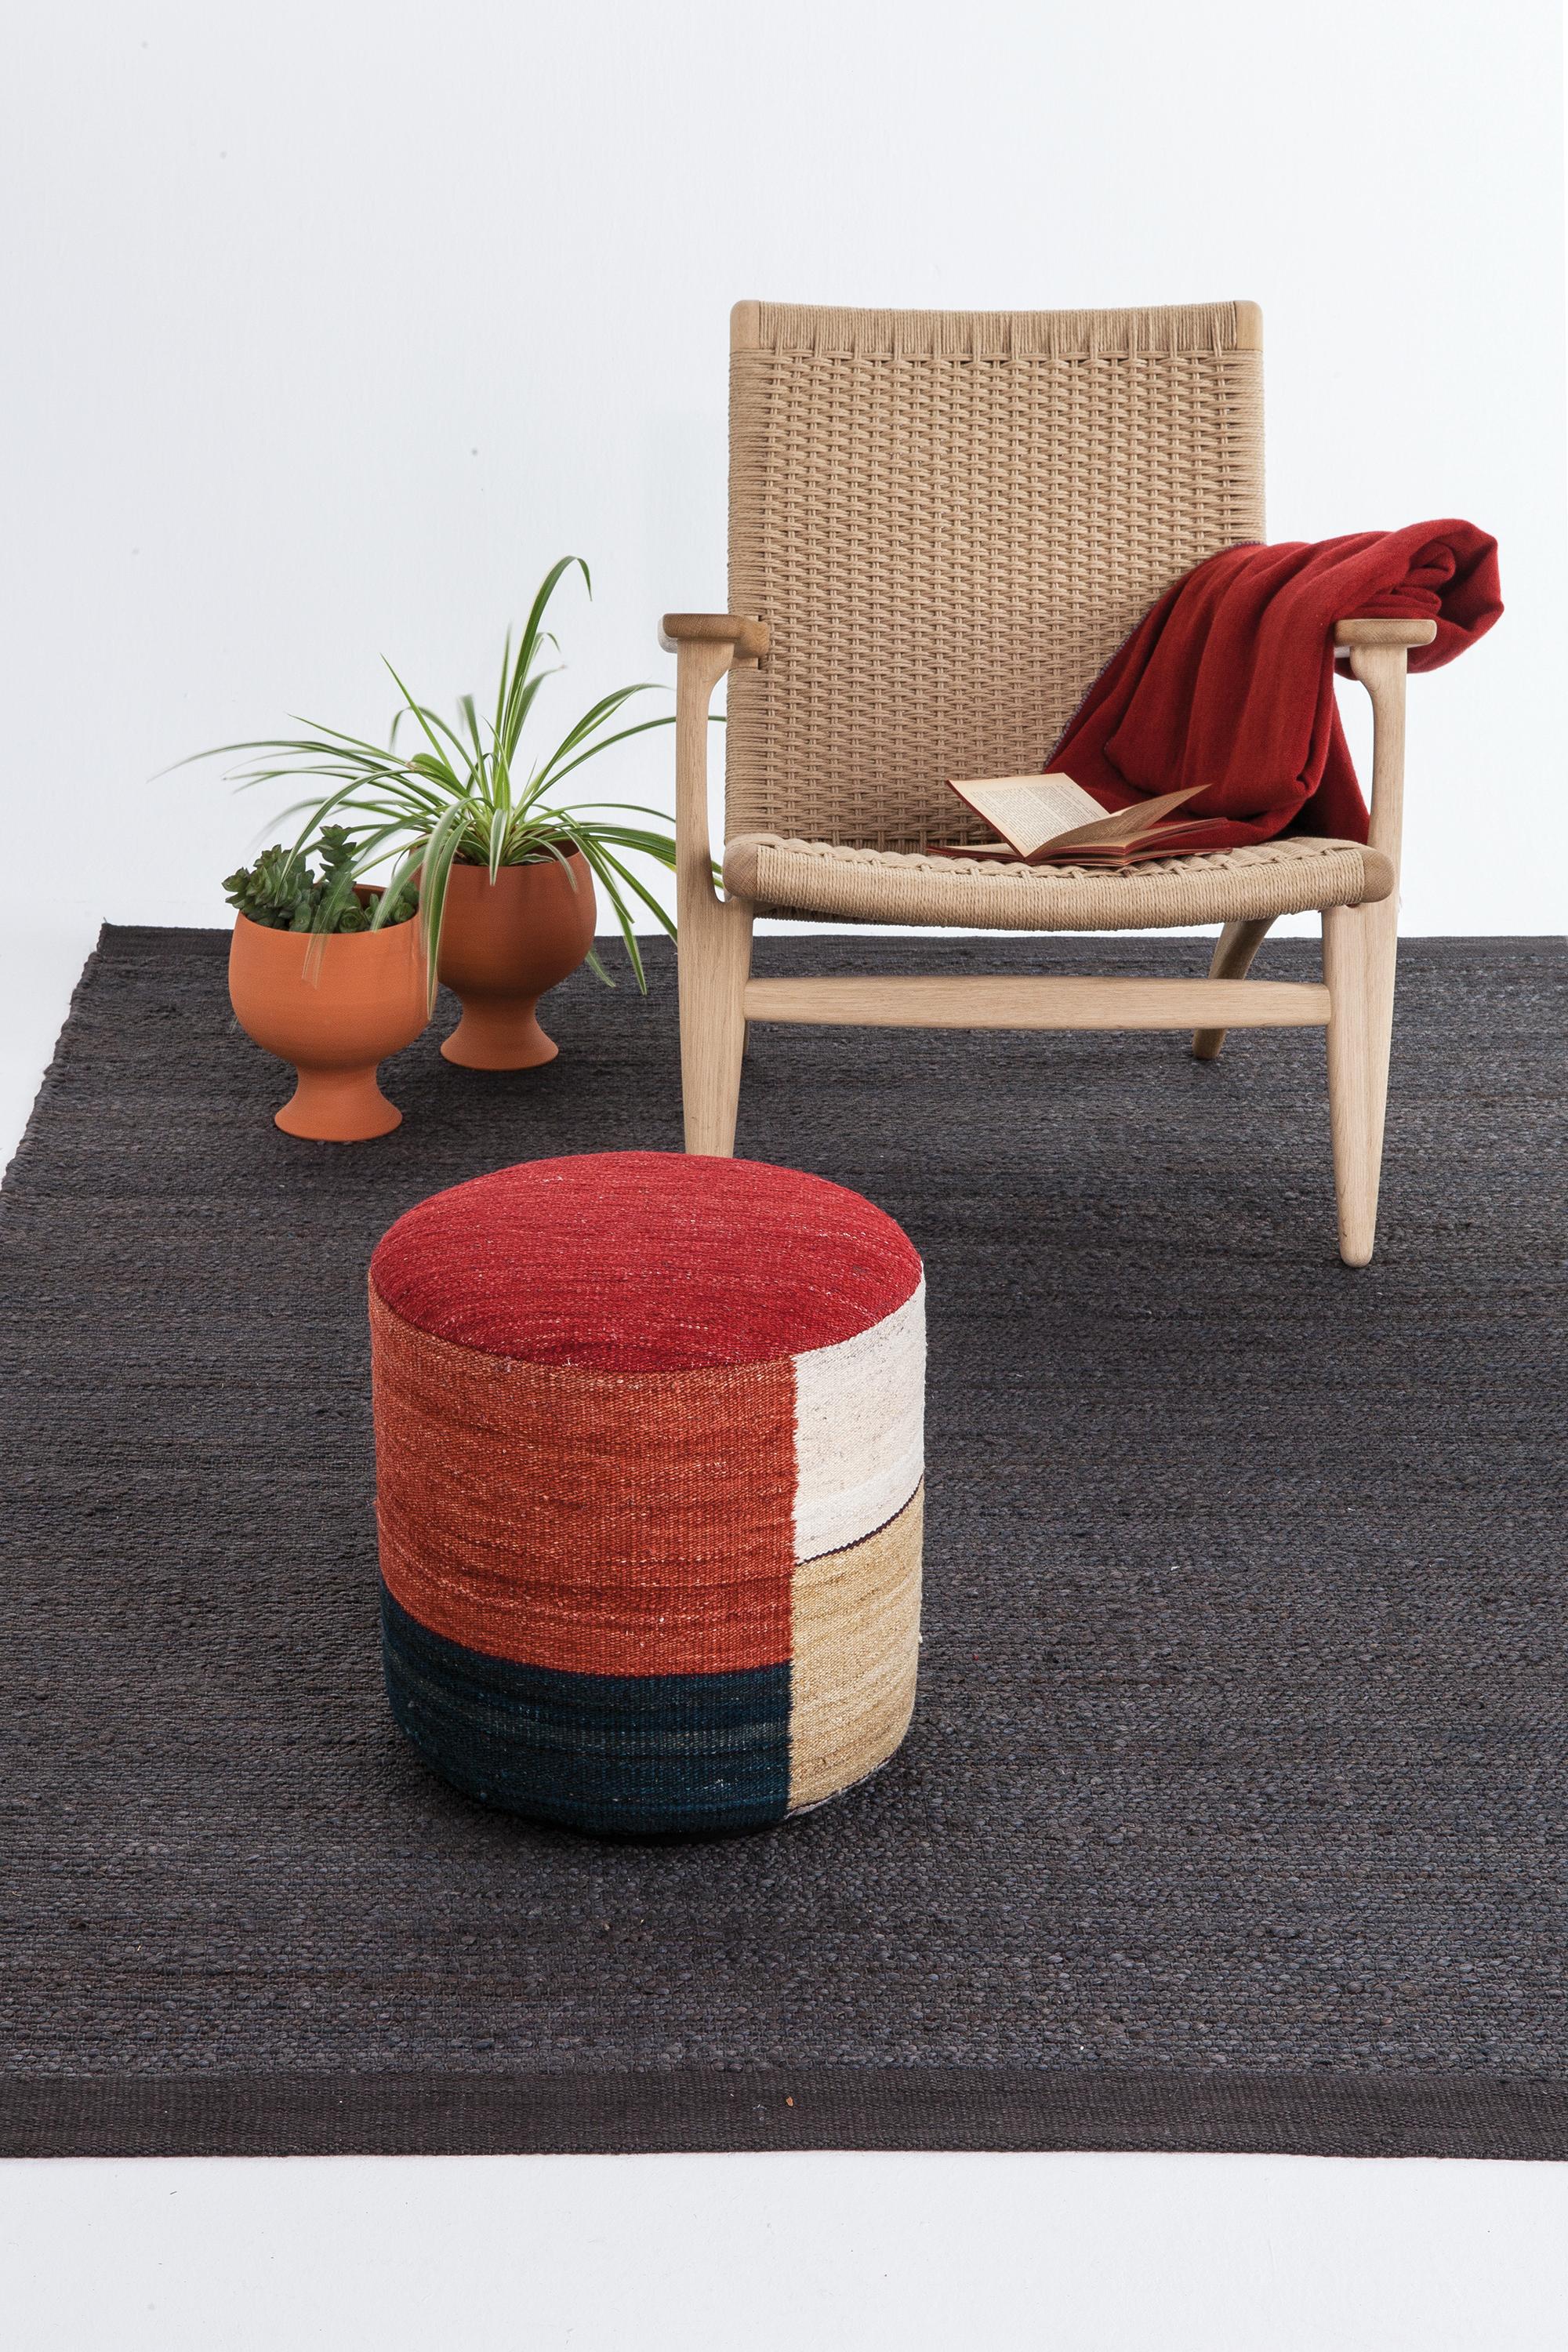 Wool 'Kilim 1' Pouf by Nani Marquina and Marcos Catalán for Nanimarquina For Sale